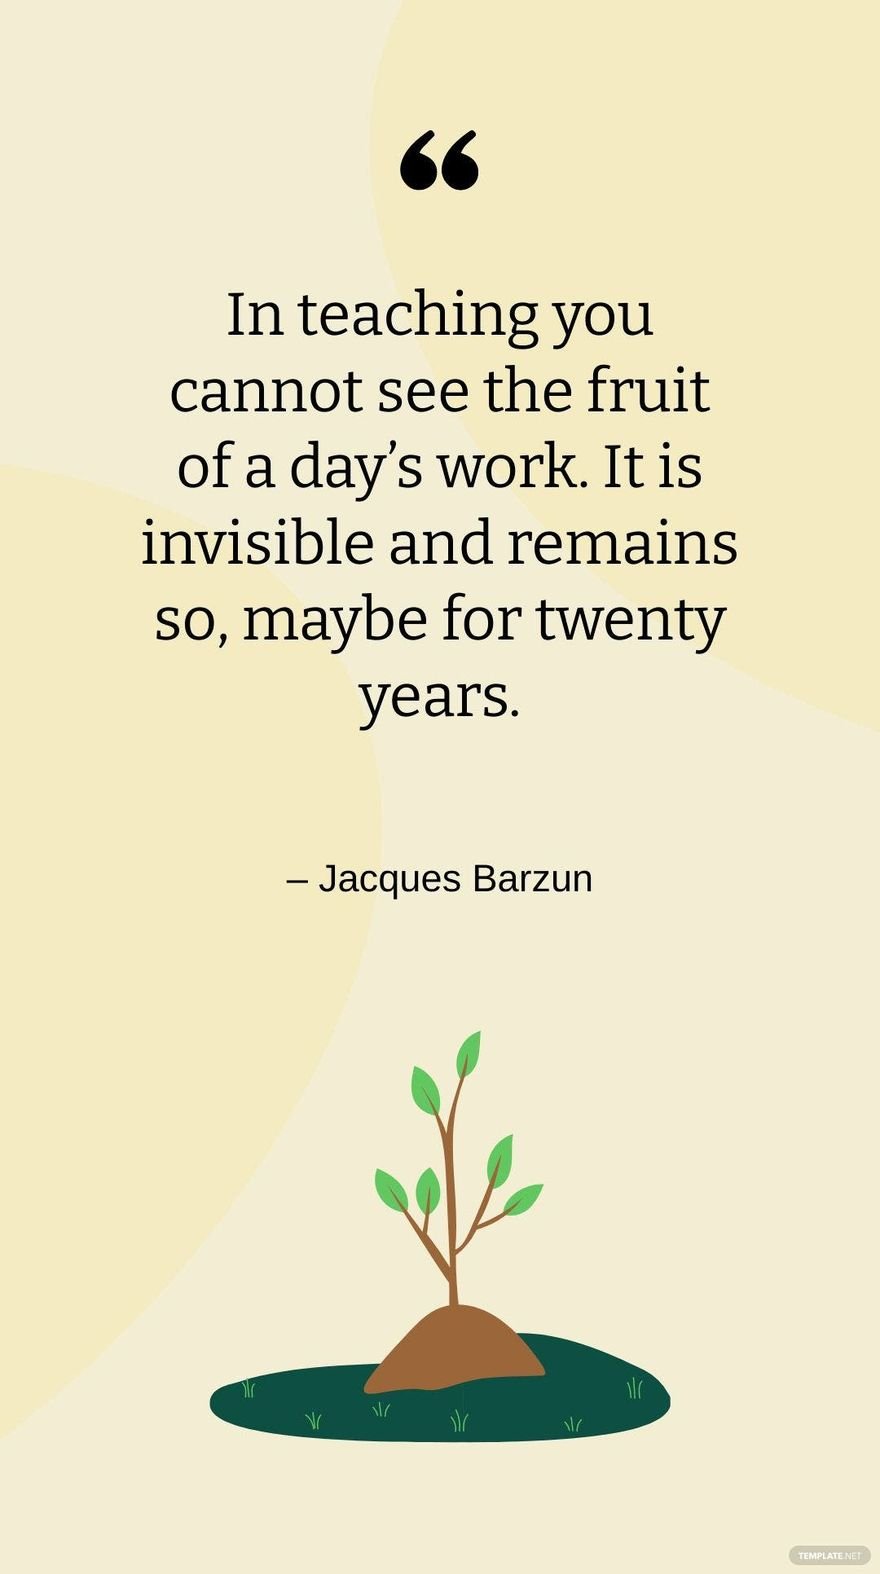 Free Jacques Barzun - In teaching you cannot see the fruit of a day’s work. It is invisible and remains so, maybe for twenty years.